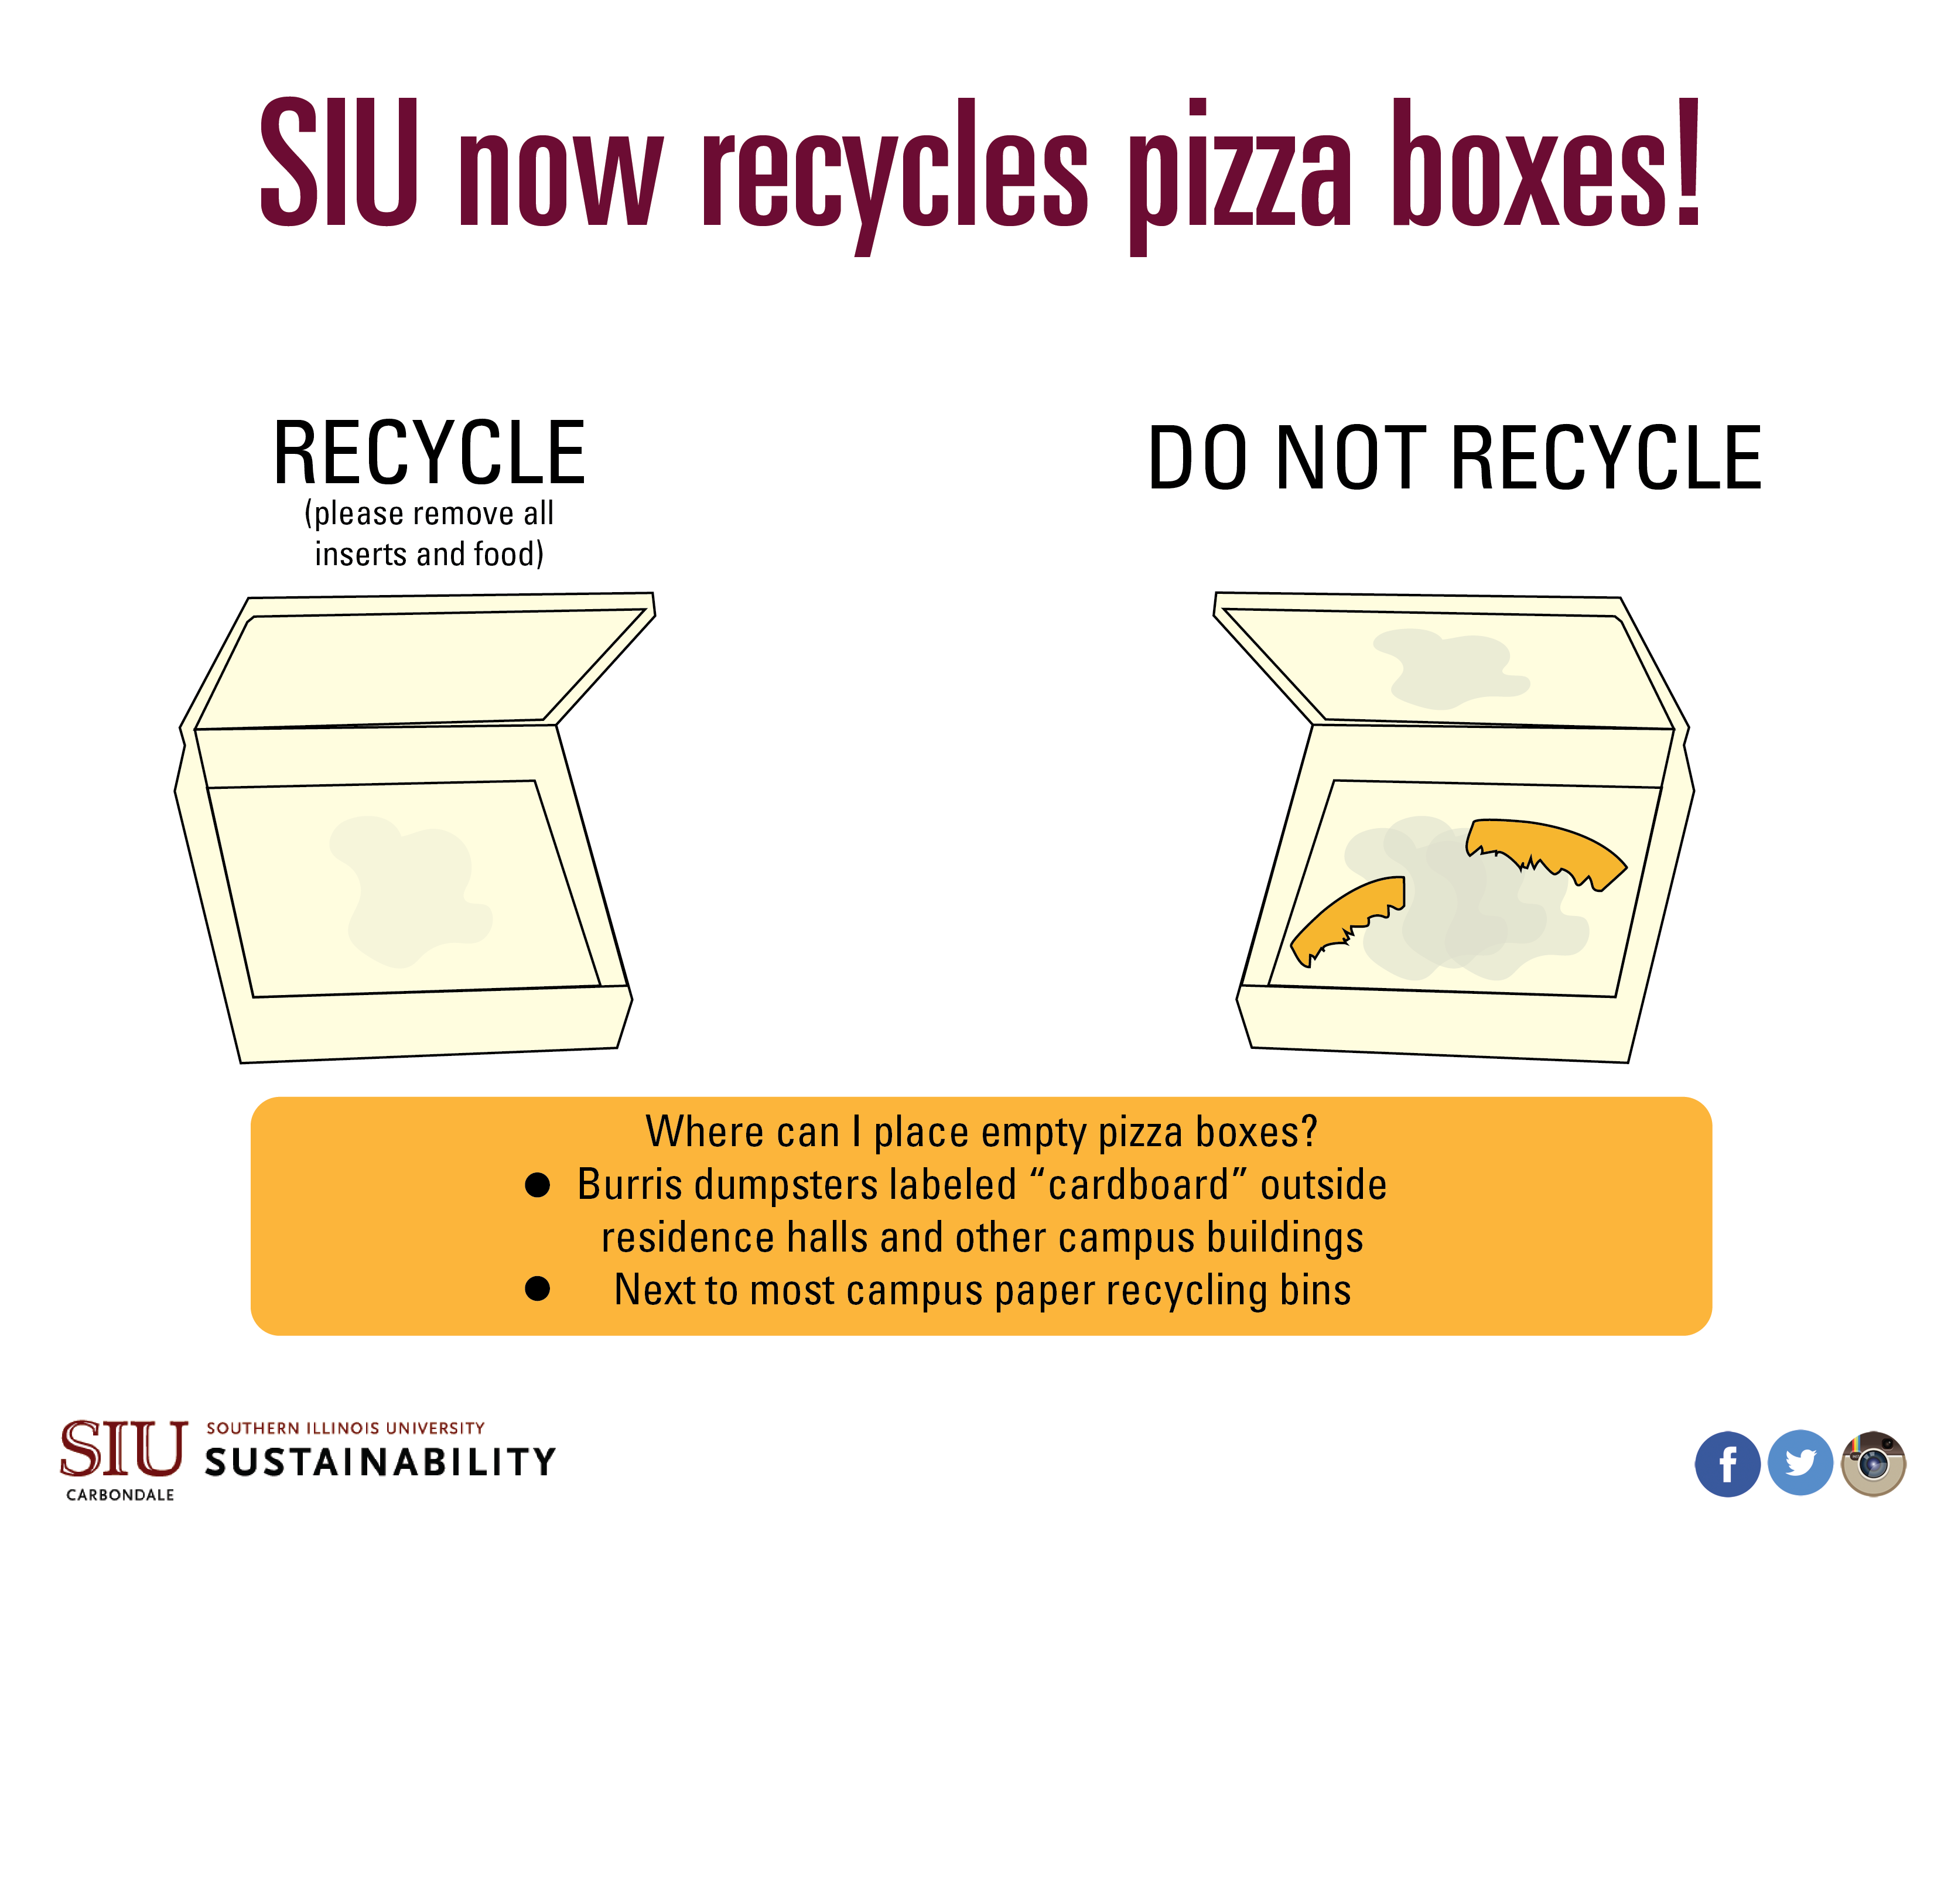 Pizza boxes can be recycled at SIU. All food and inserts should be removed.